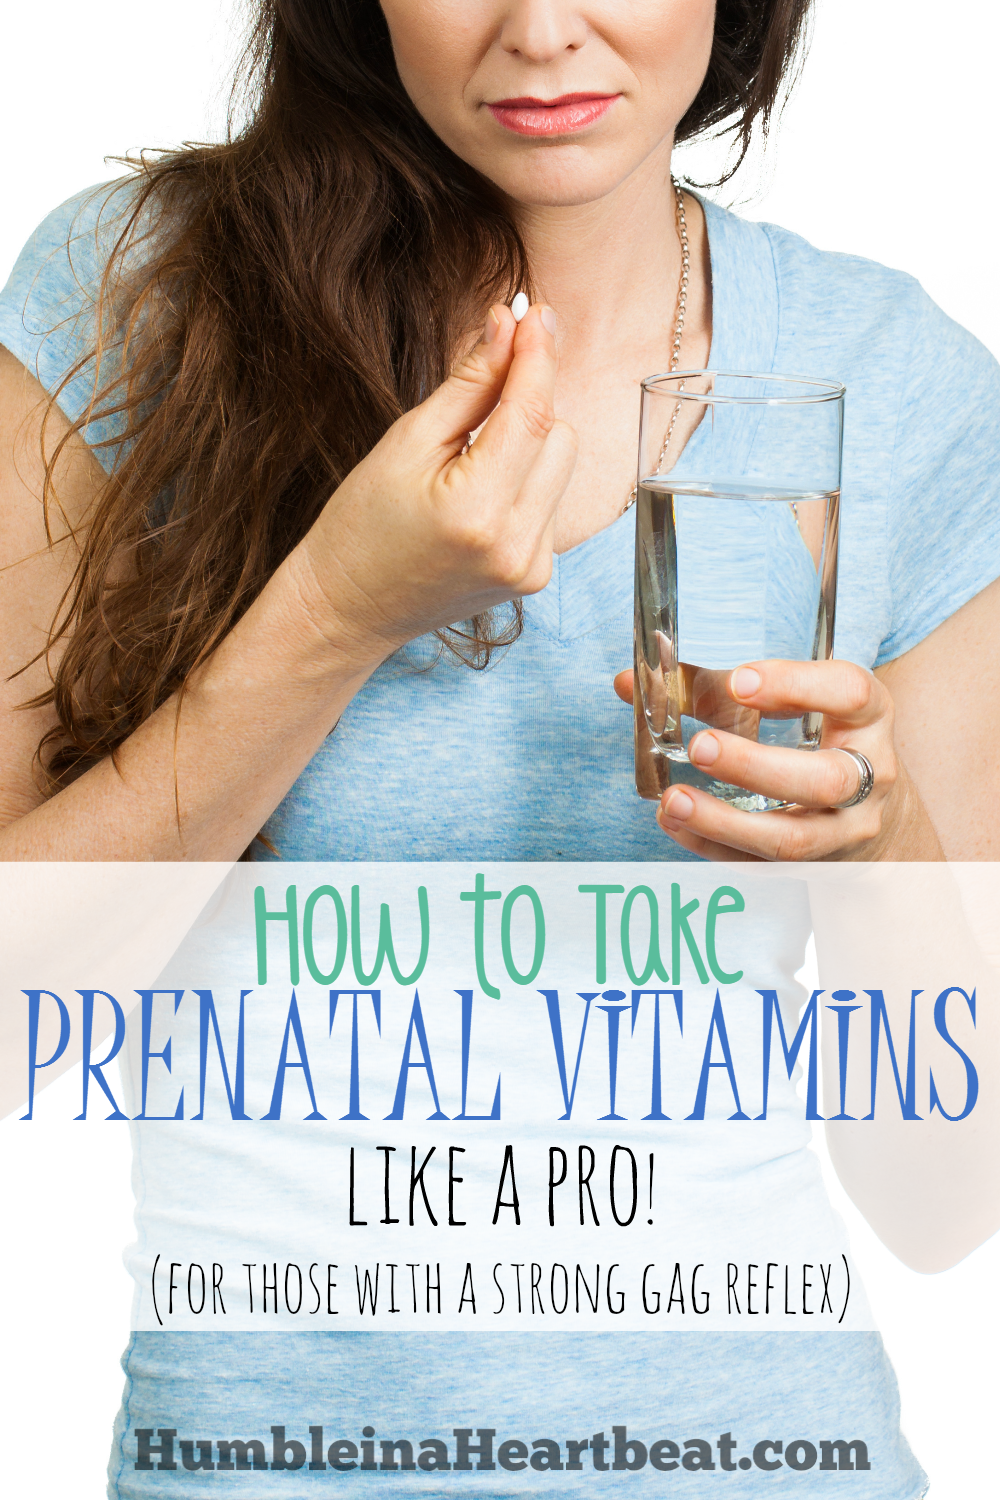 A strong gag reflex can truly get in the way of trying to take a prenatal vitamin. Here are the things I did to finally start swallowing my prenatal vitamin while pregnant and nauseous!